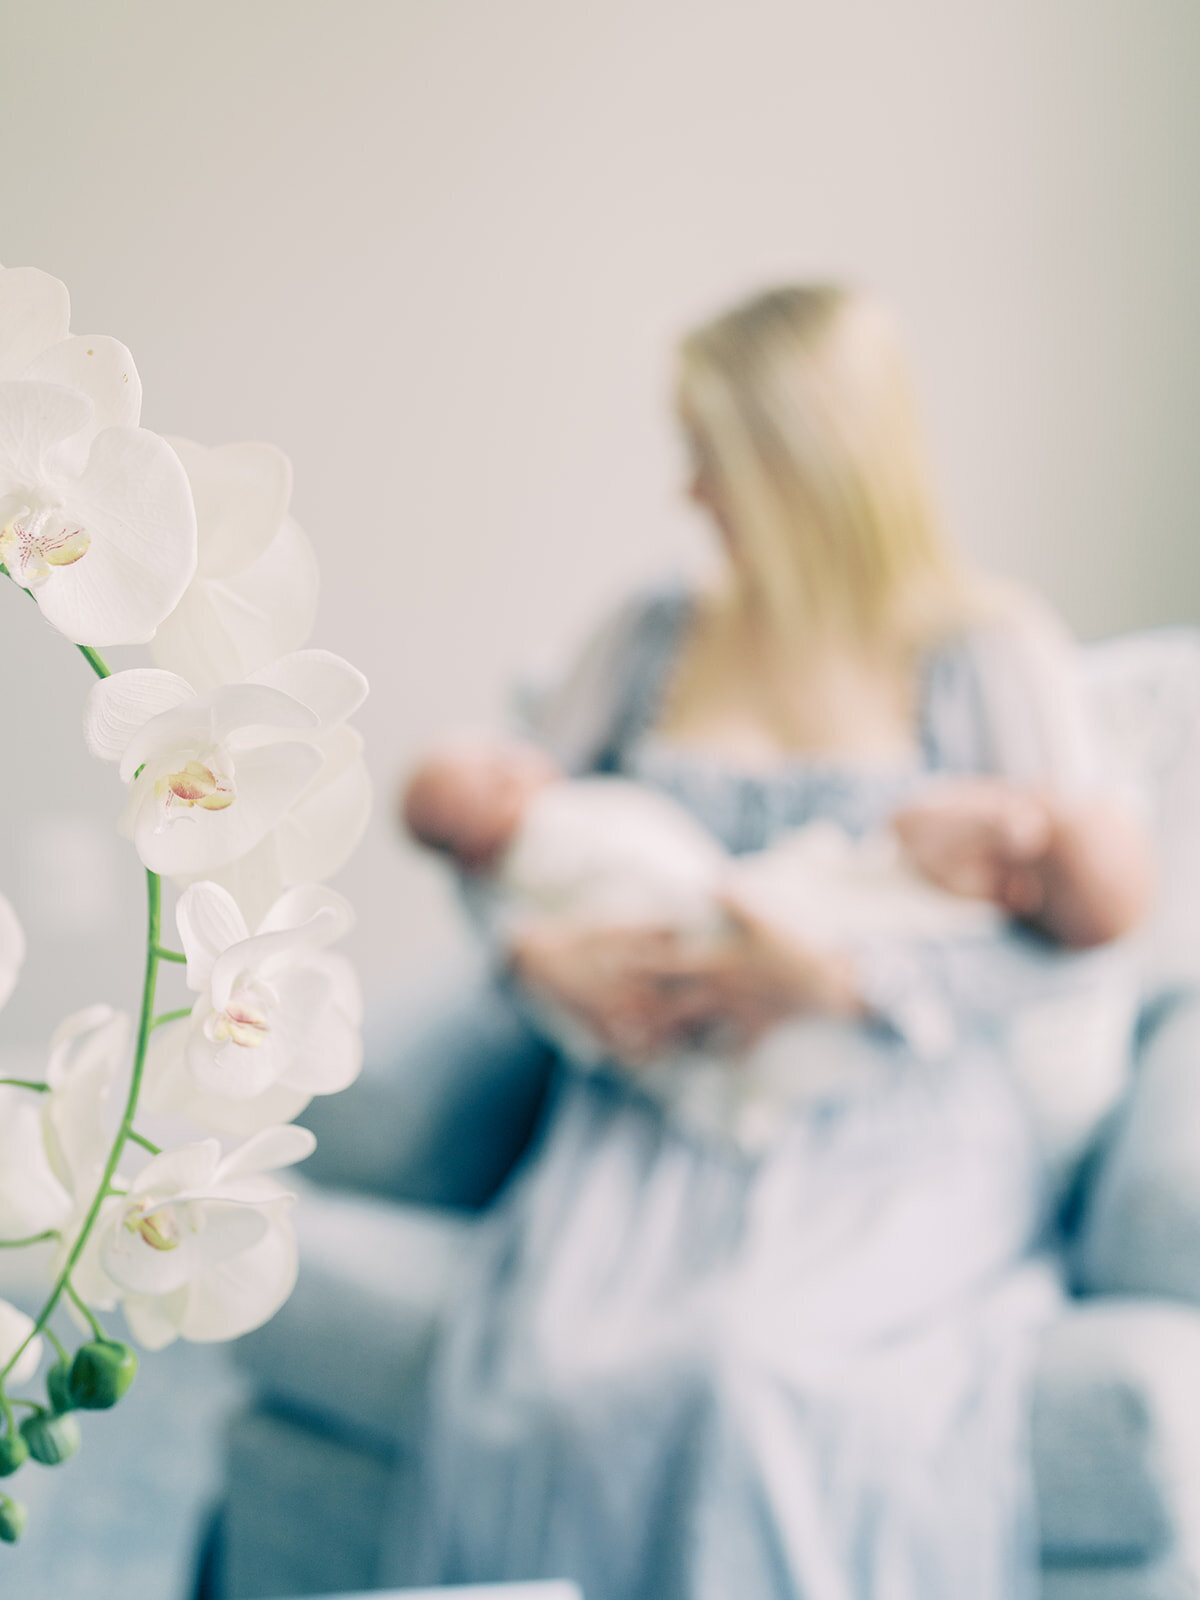 In-focus white orchid is seen in the foreground while an out-of-focus mother sits in the background holding her twin baby boys.